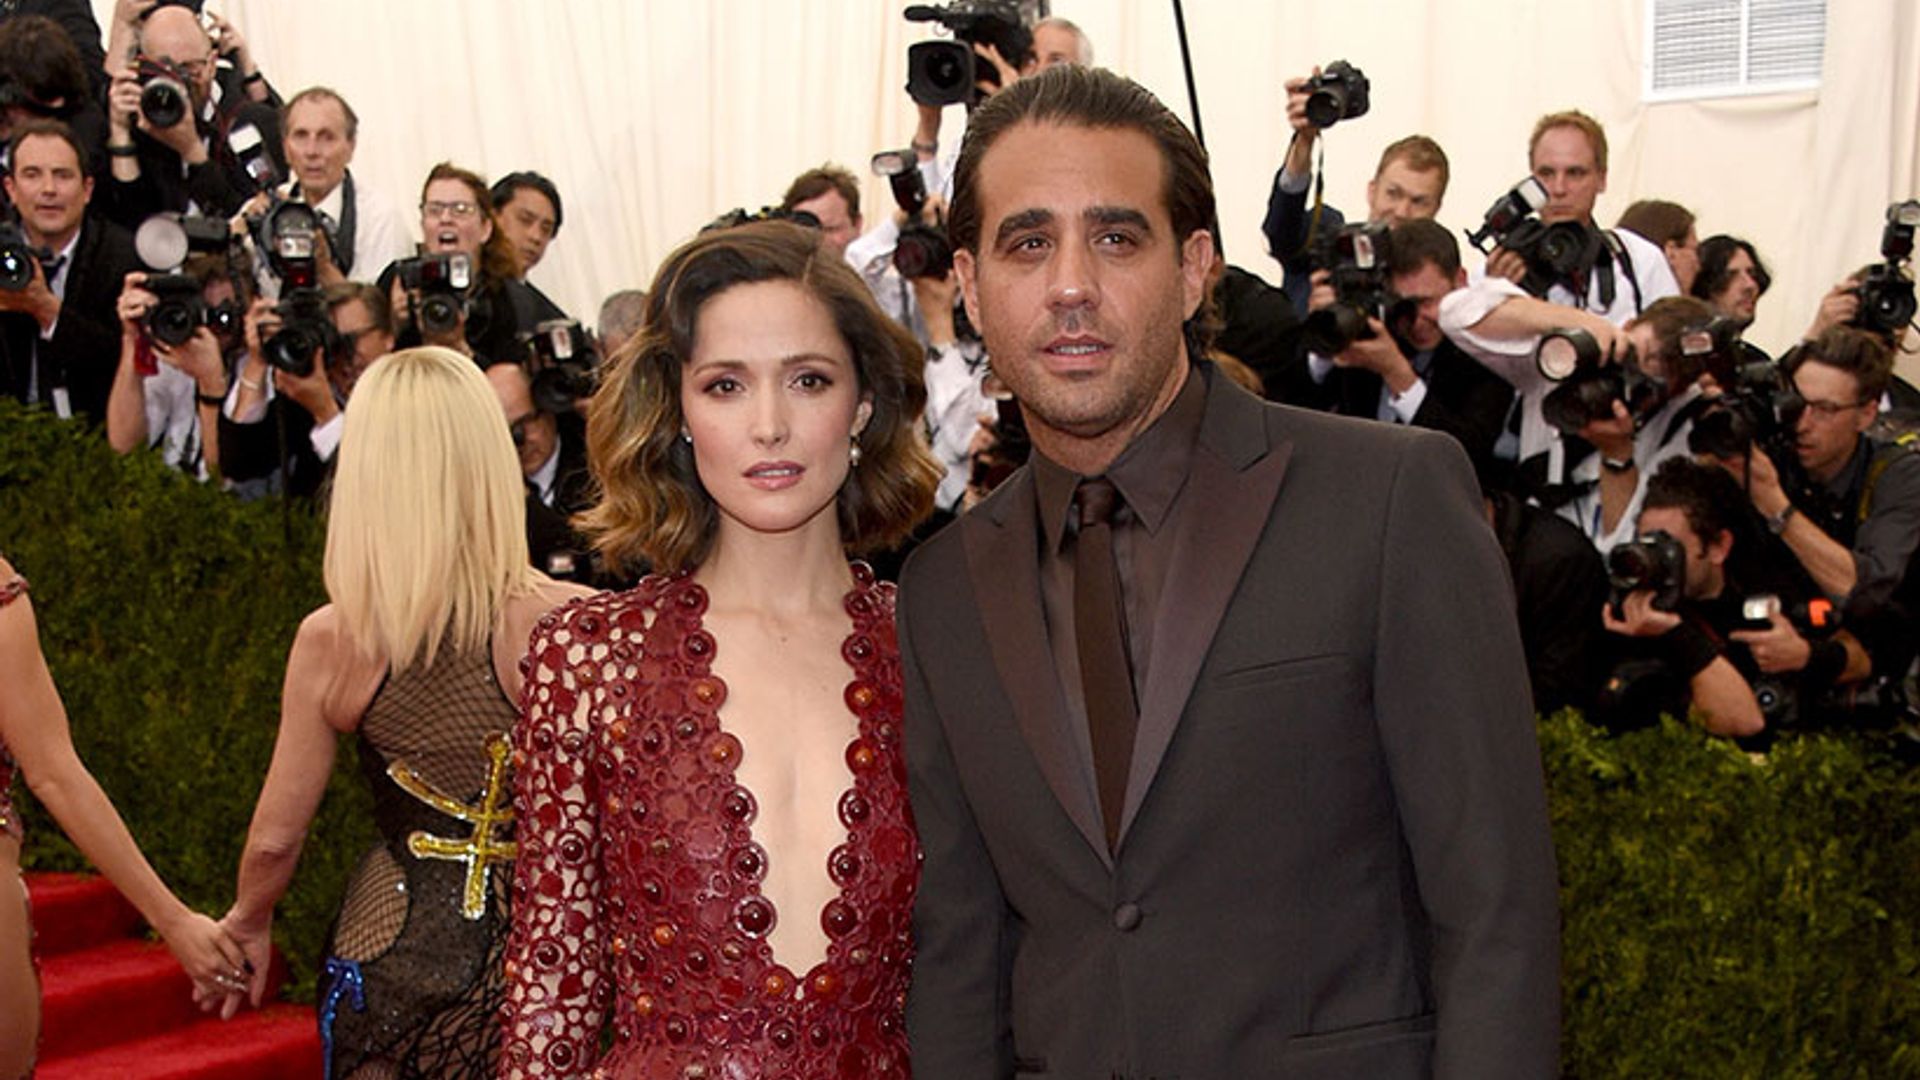 Rose Byrne opens up about motherhood: 'You have this huge responsibility'